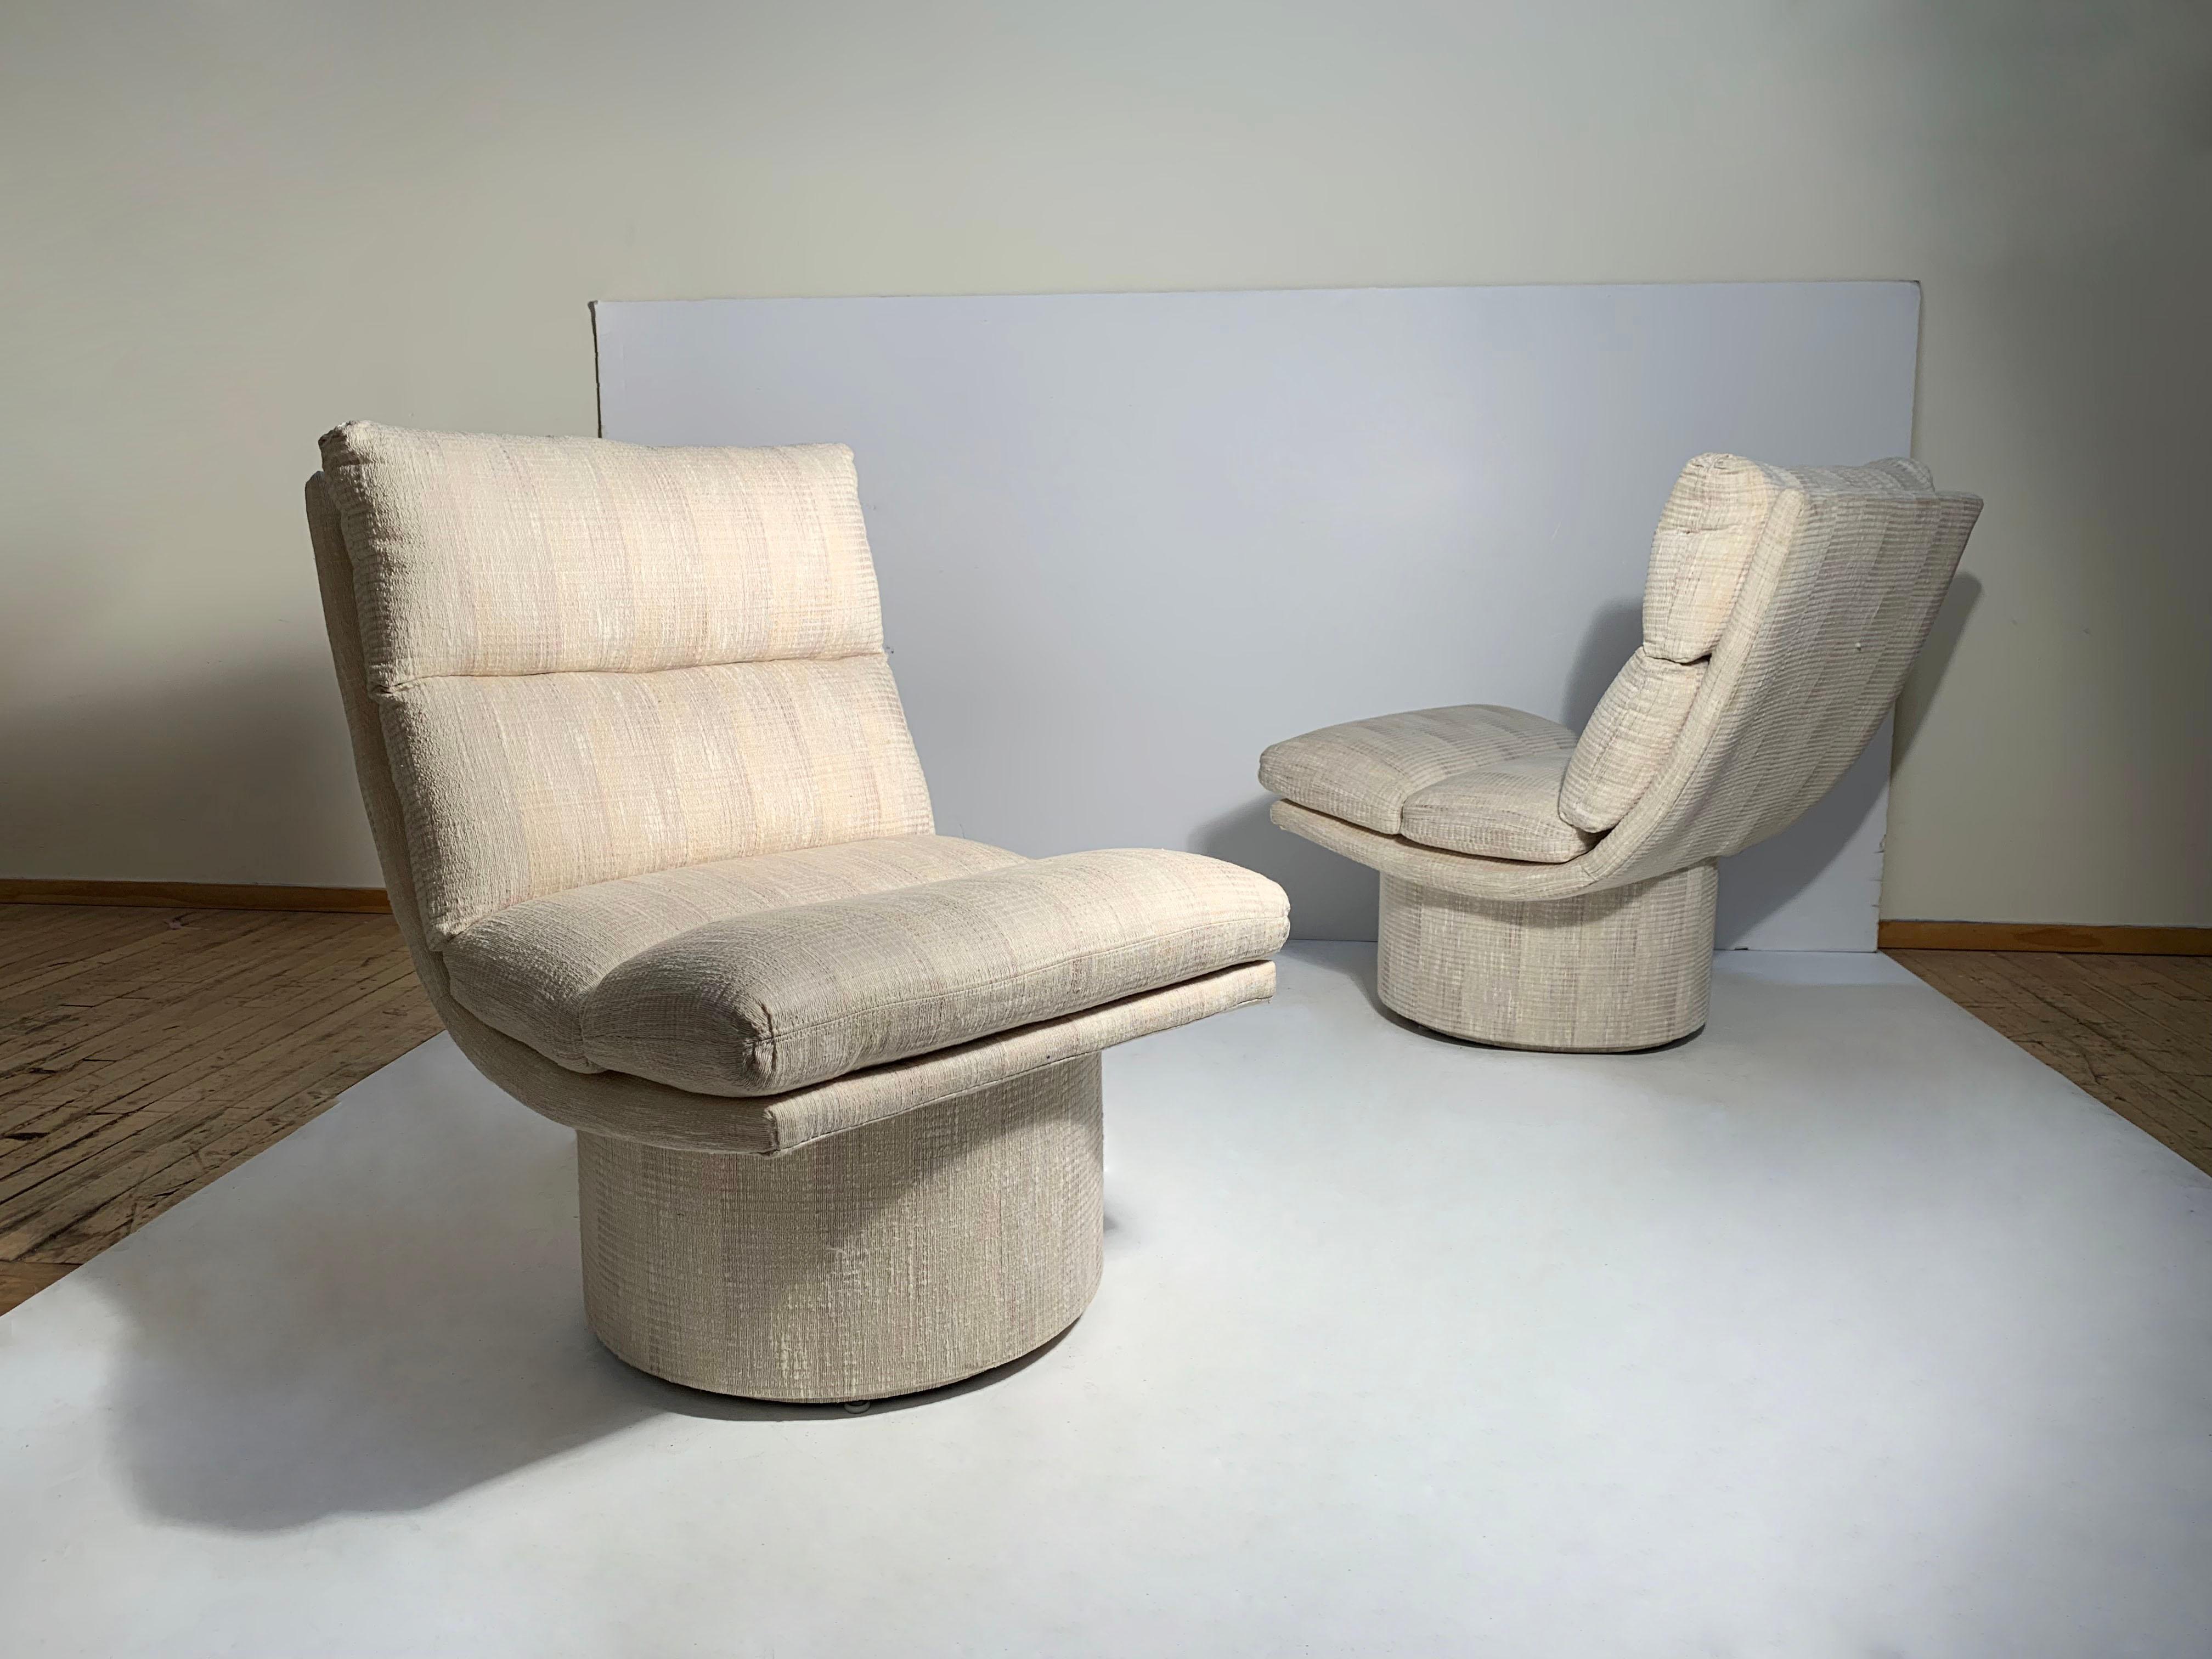 Vintage Post Modern swivel lounge scoop chairs by Classic Gallery.

These can use reupholstery. One of them needs tightening with the swivel mechanism that should be handled when reupholstering. These would look great with a wrapped wood veneer or